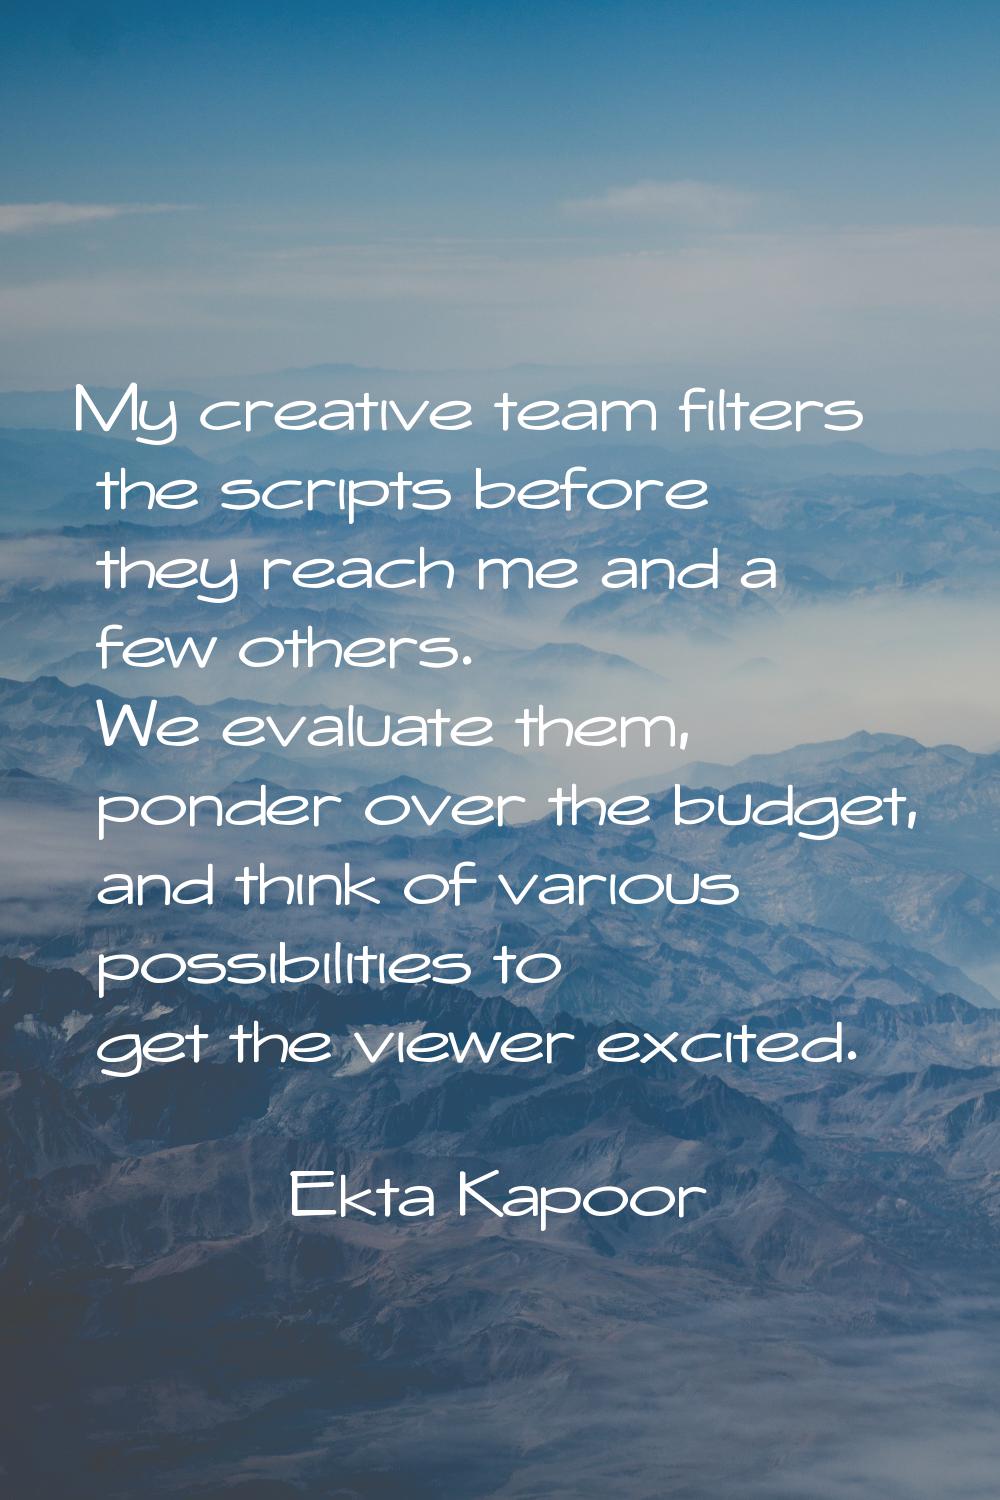 My creative team filters the scripts before they reach me and a few others. We evaluate them, ponde